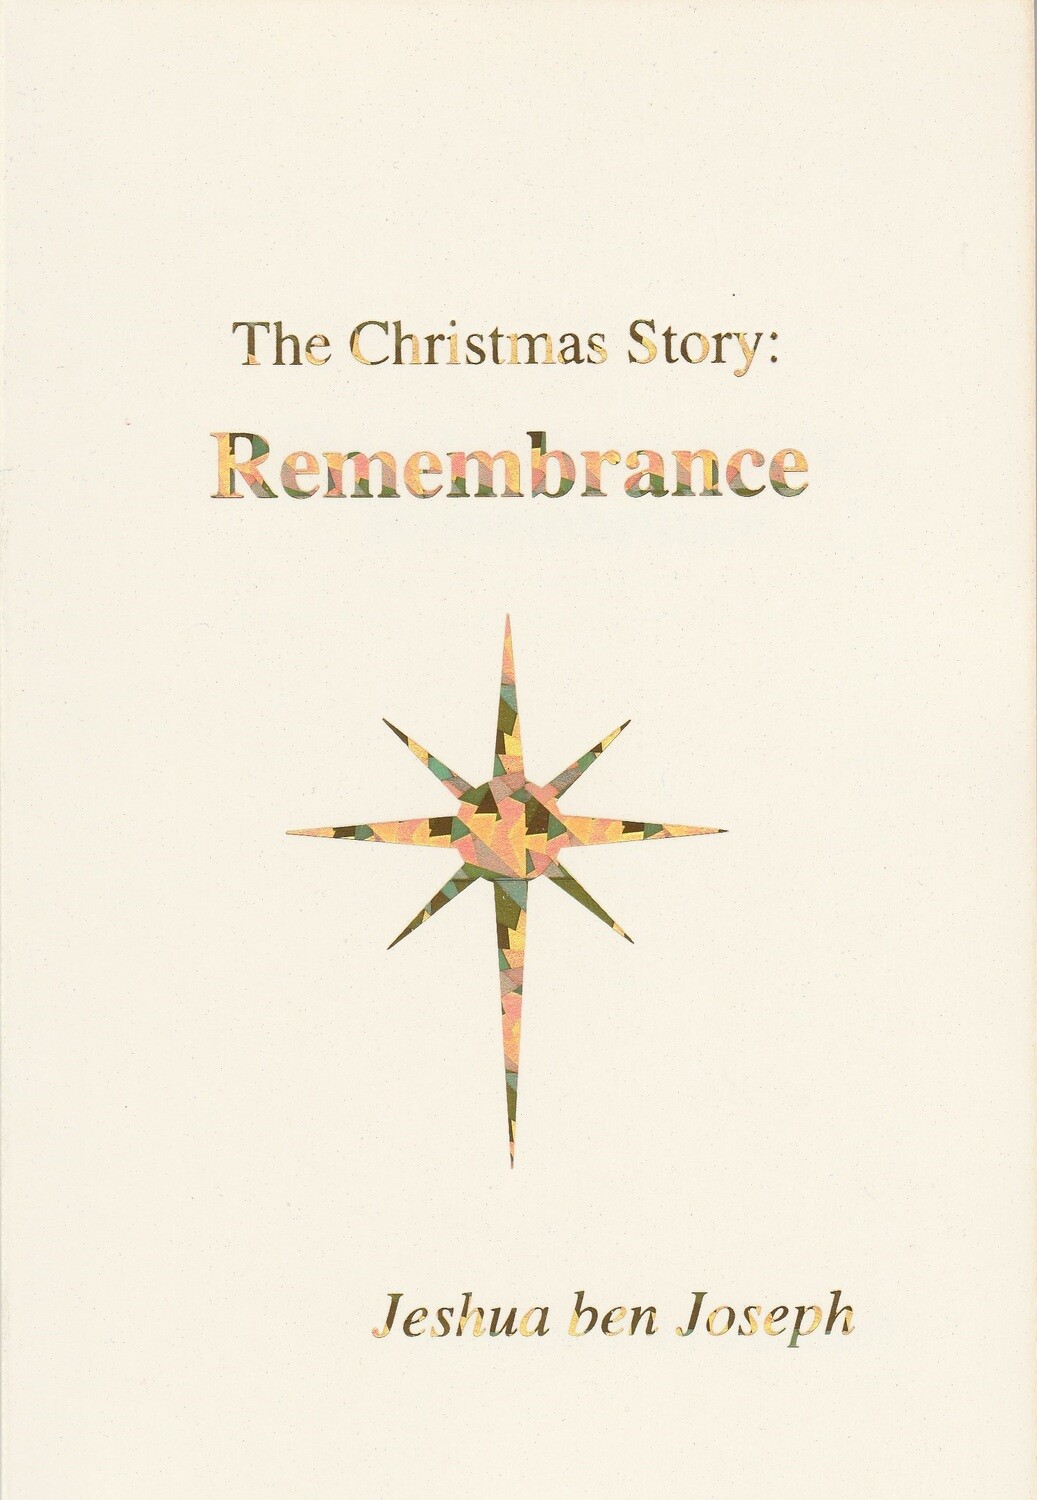 The Christmas Story: Remembrance